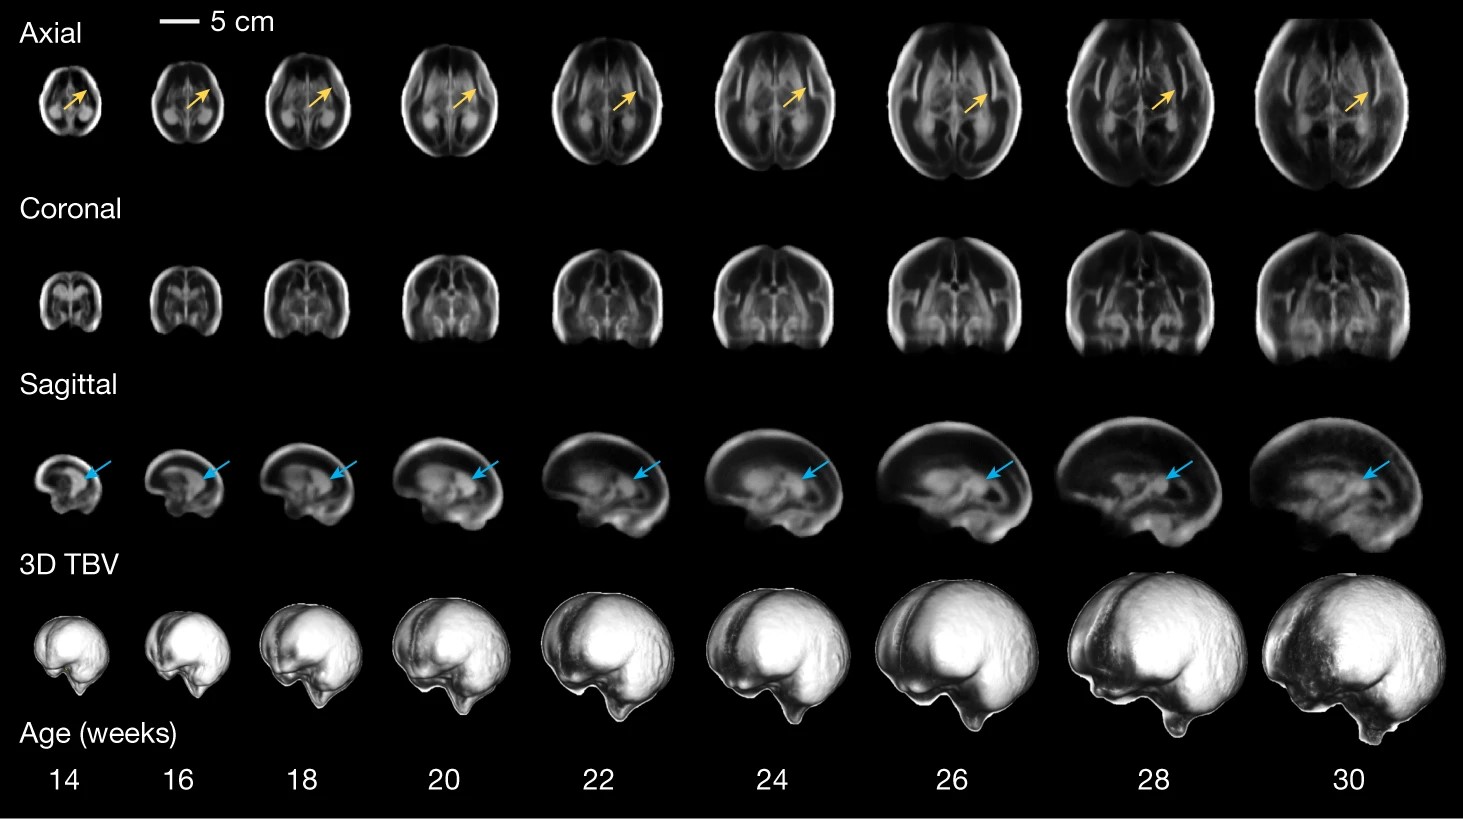 Image showing a&nbsp;3D&thinsp;+&thinsp;time atlas templates depicting the fetal brain at even gestational weeks for the axial (top), coronal (middle) and sagittal (bottom) views